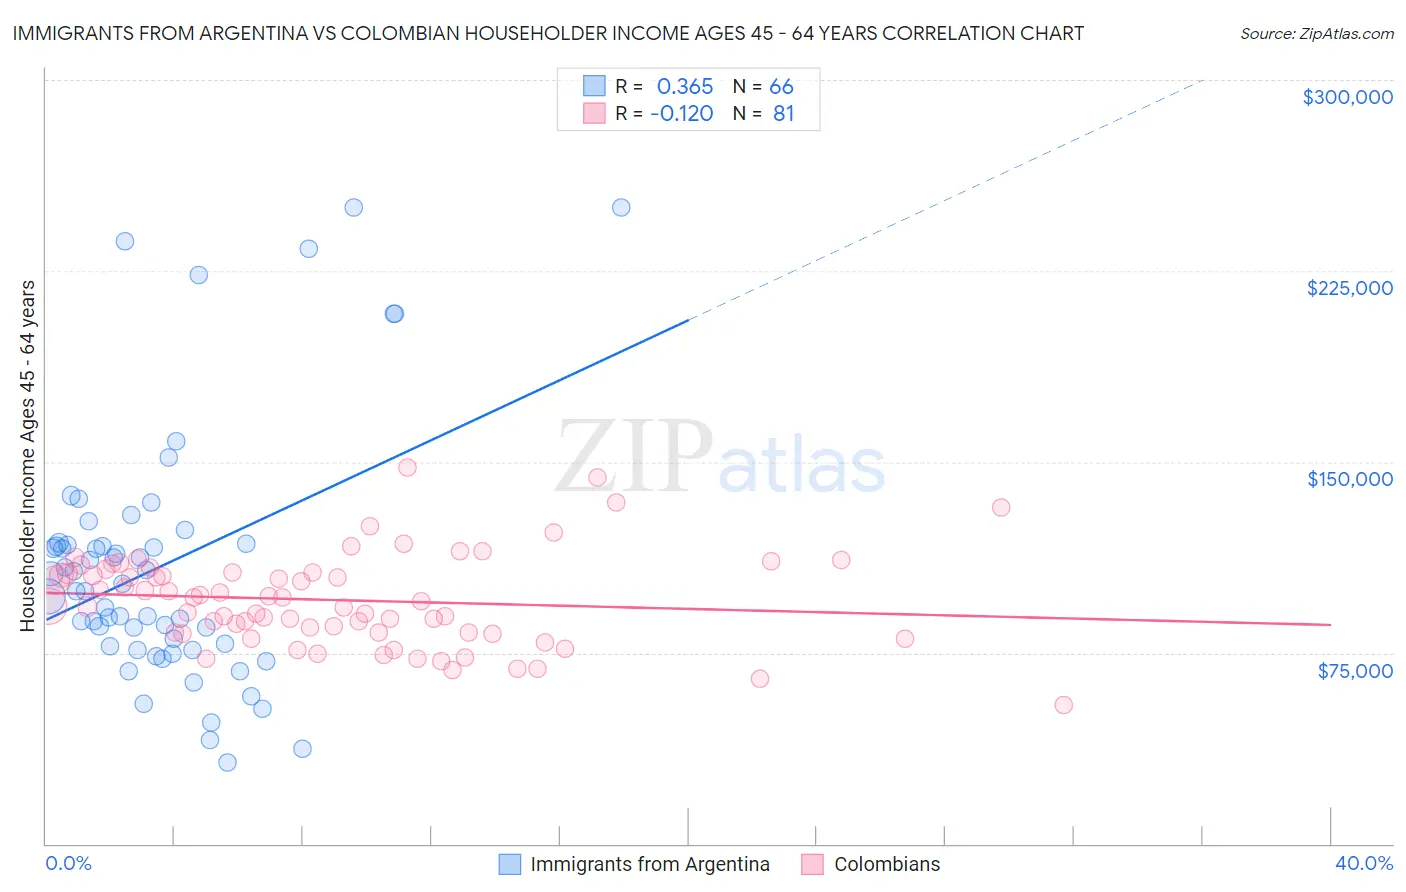 Immigrants from Argentina vs Colombian Householder Income Ages 45 - 64 years